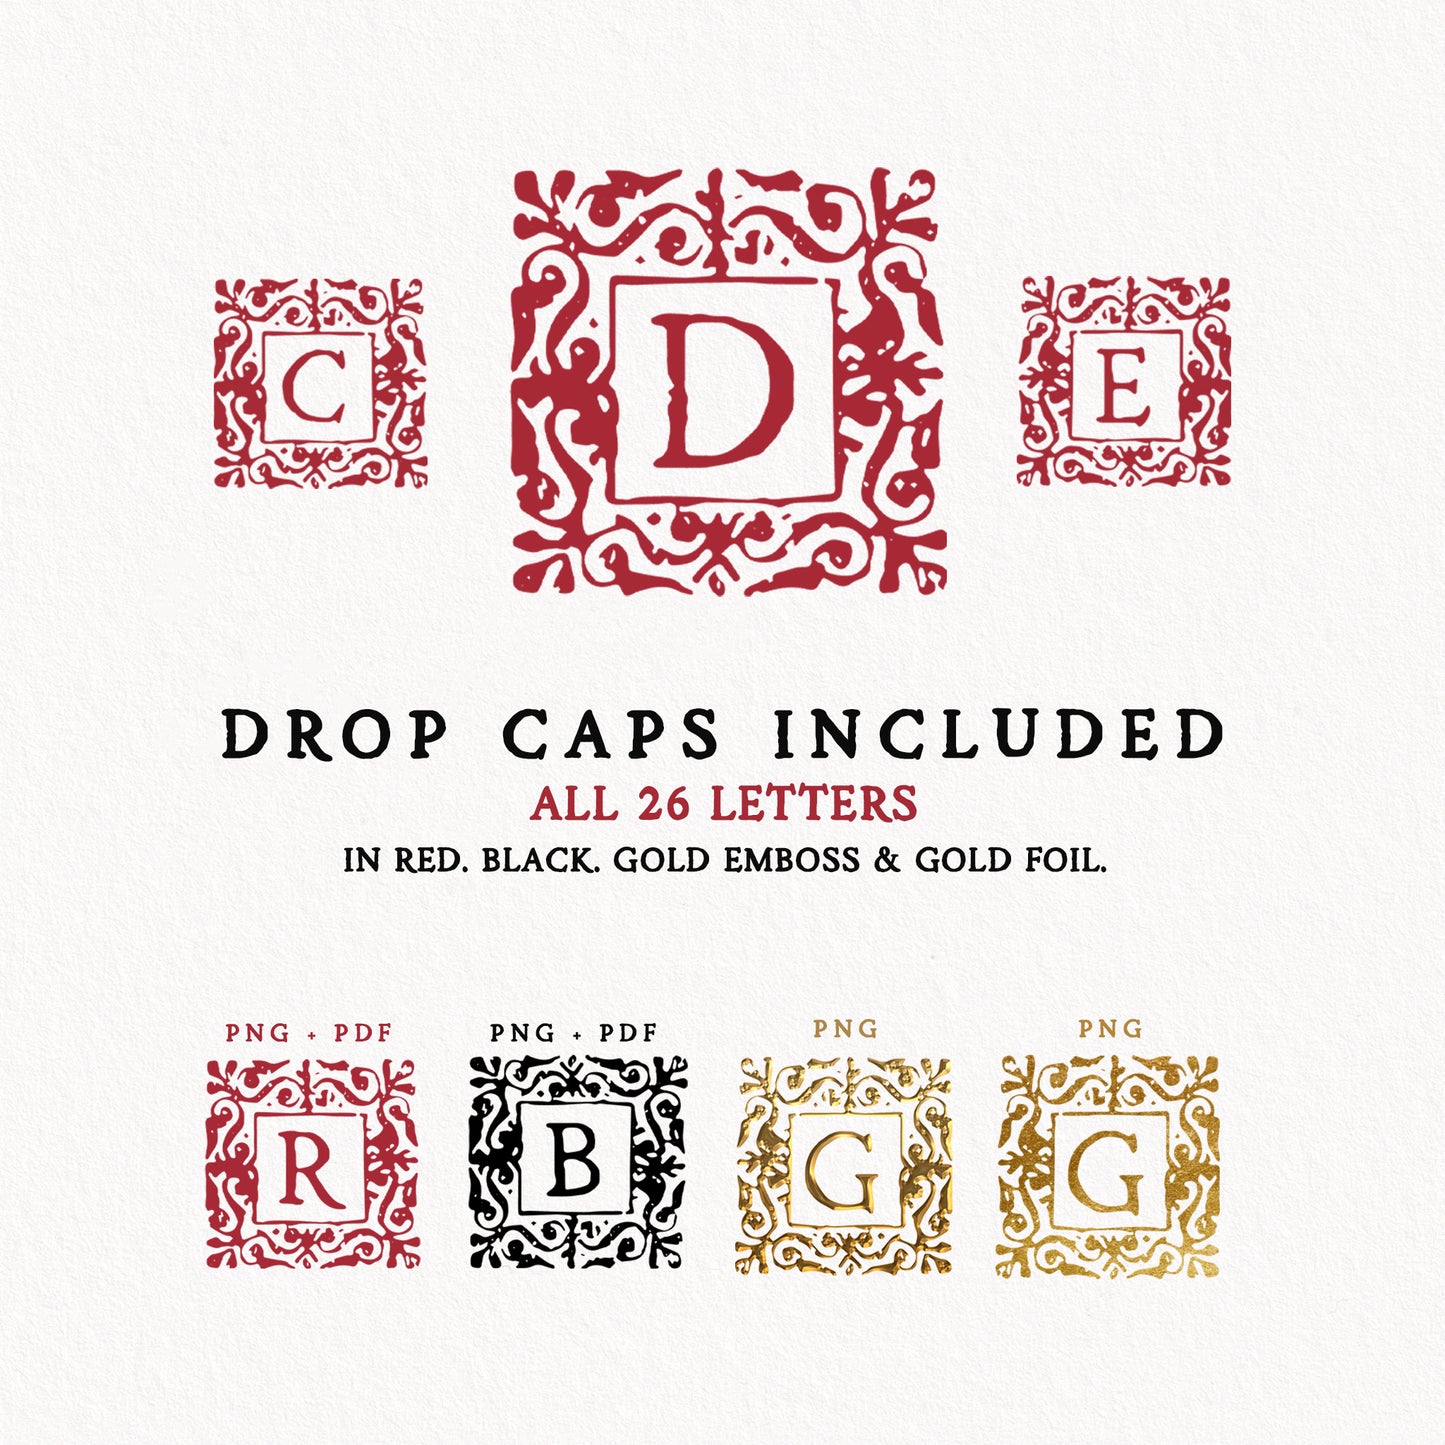 paper texture background with samples of drop caps included with the Folklore font